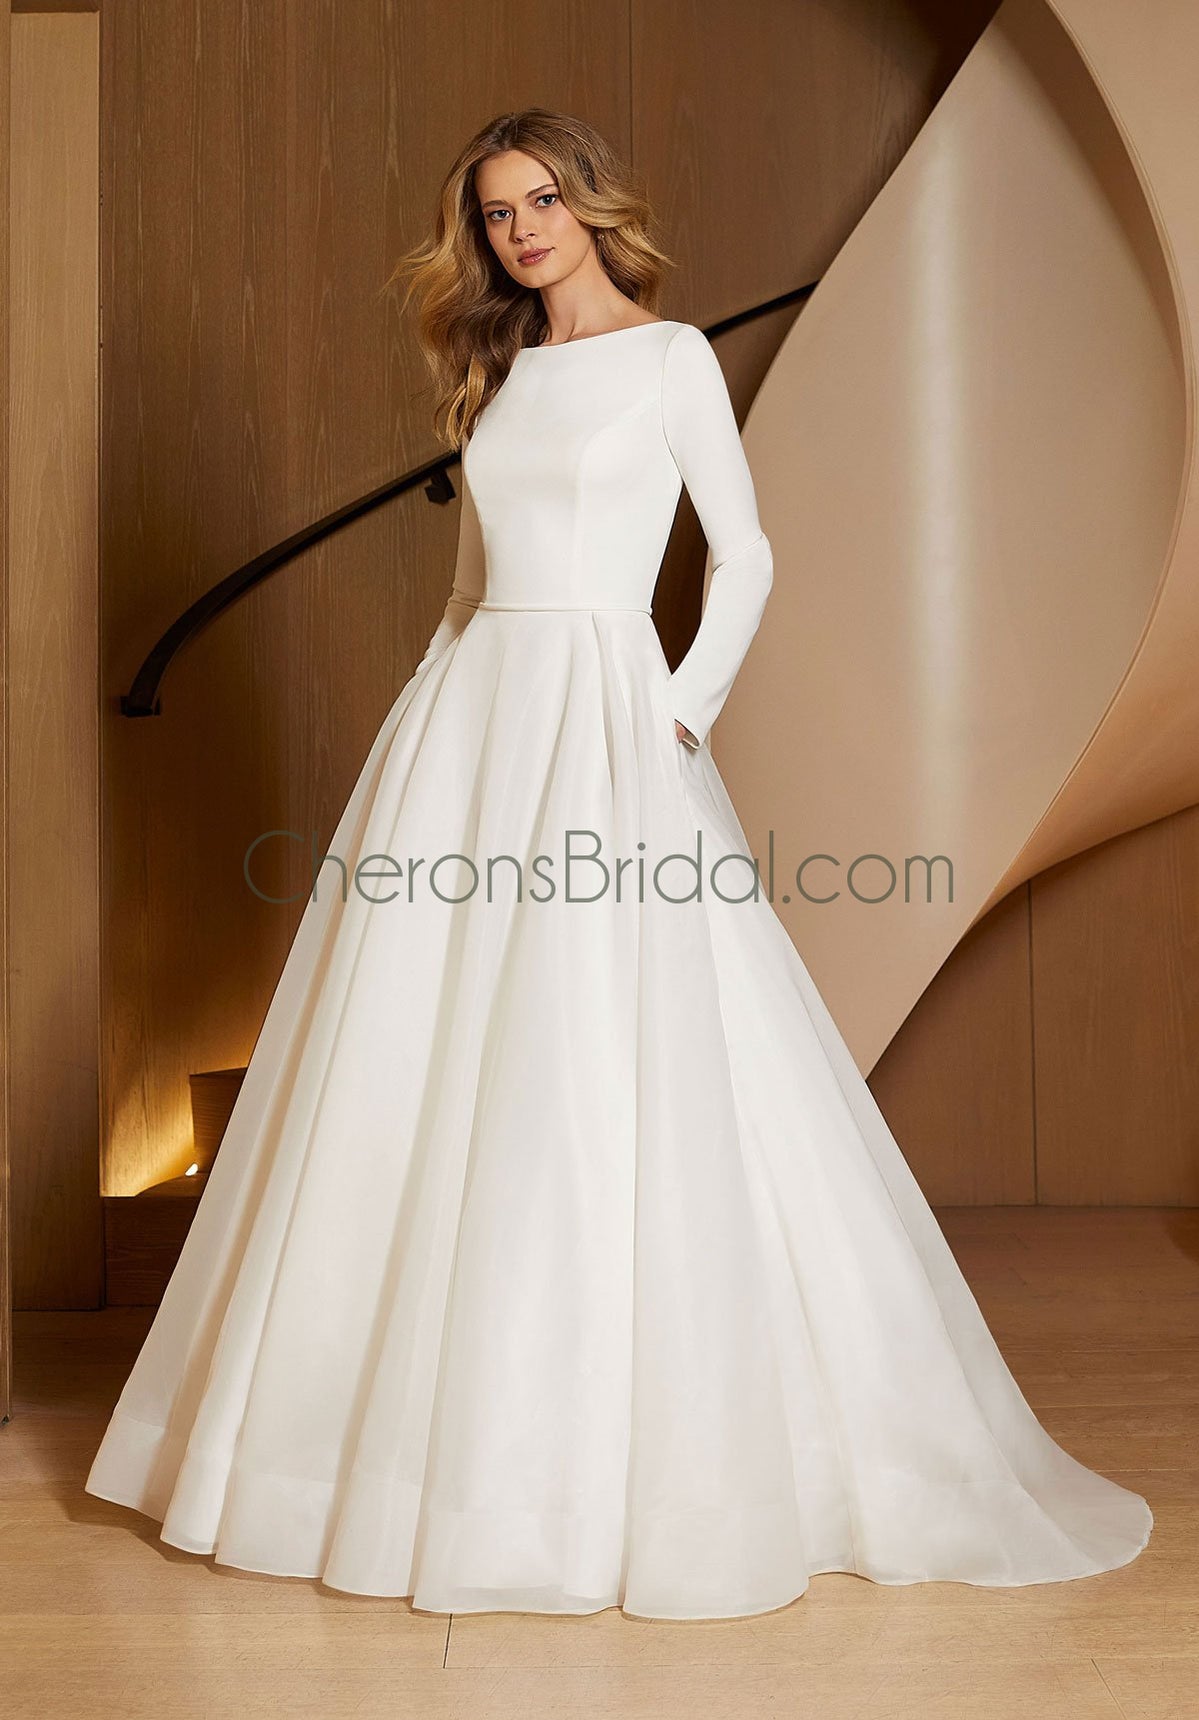 Wedding Dresses / Bridal Gowns - All Page 7 - Cheron's Bridal & All Dressed  Up Prom